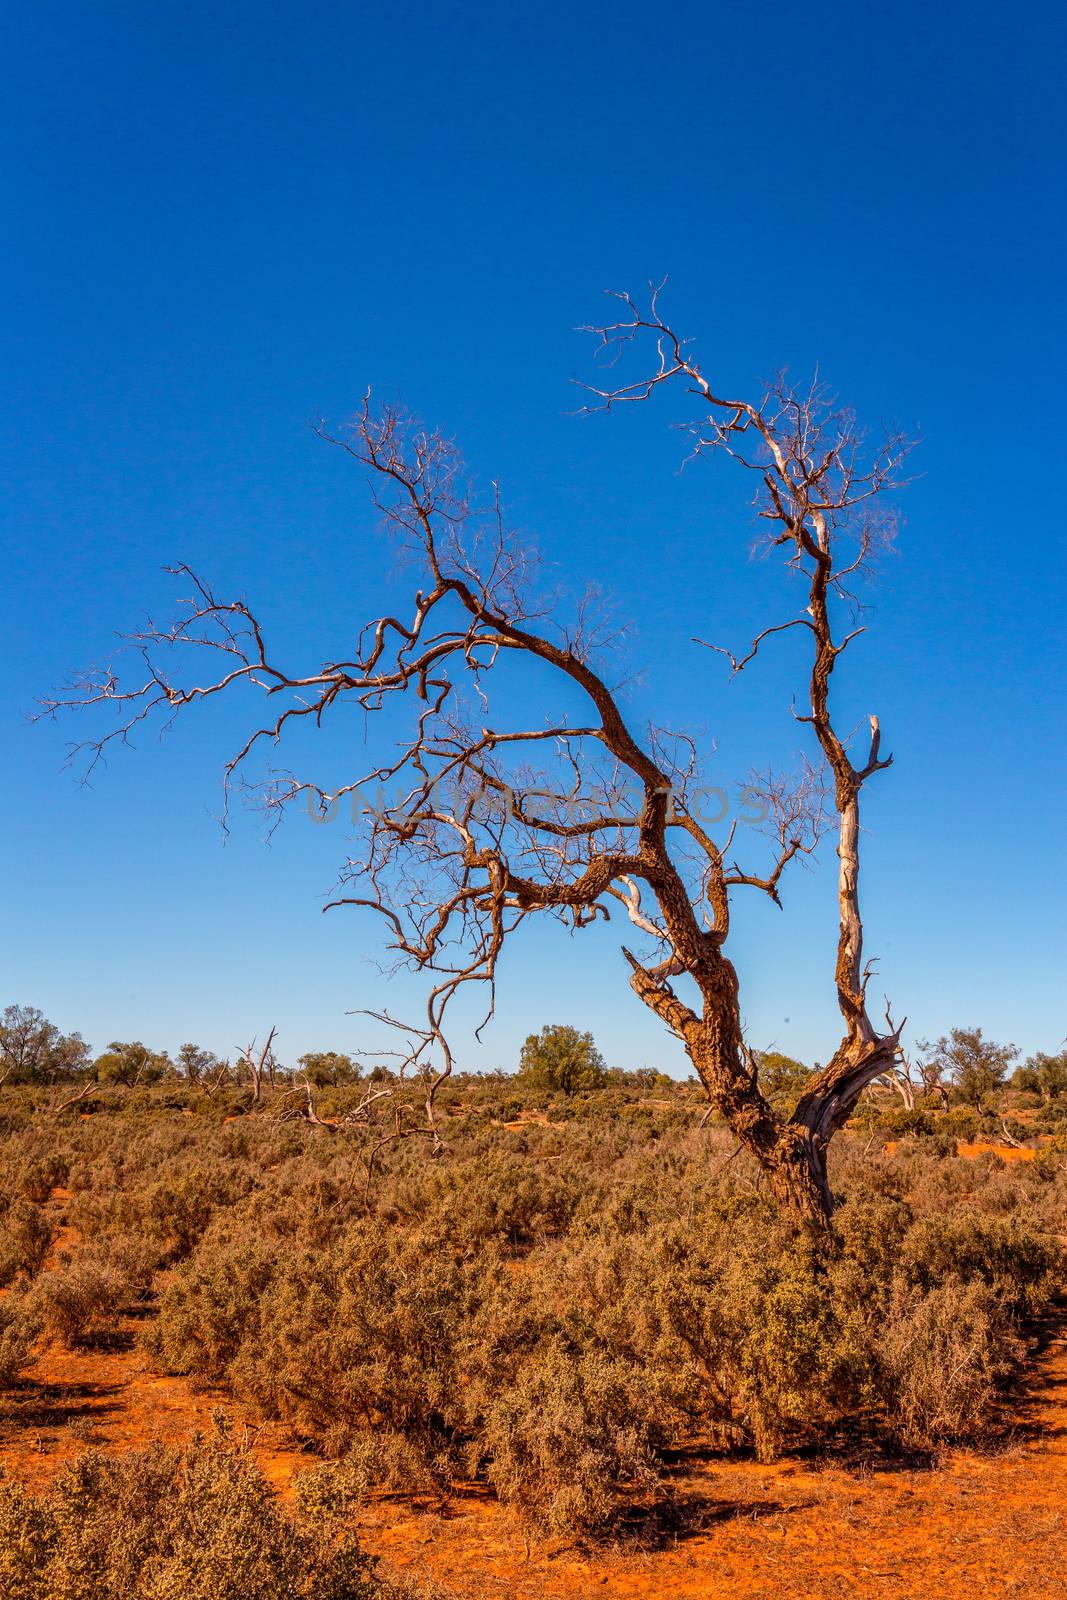 Gnarly old tree in desert bulldust and backroads of outback Australia by lovleah